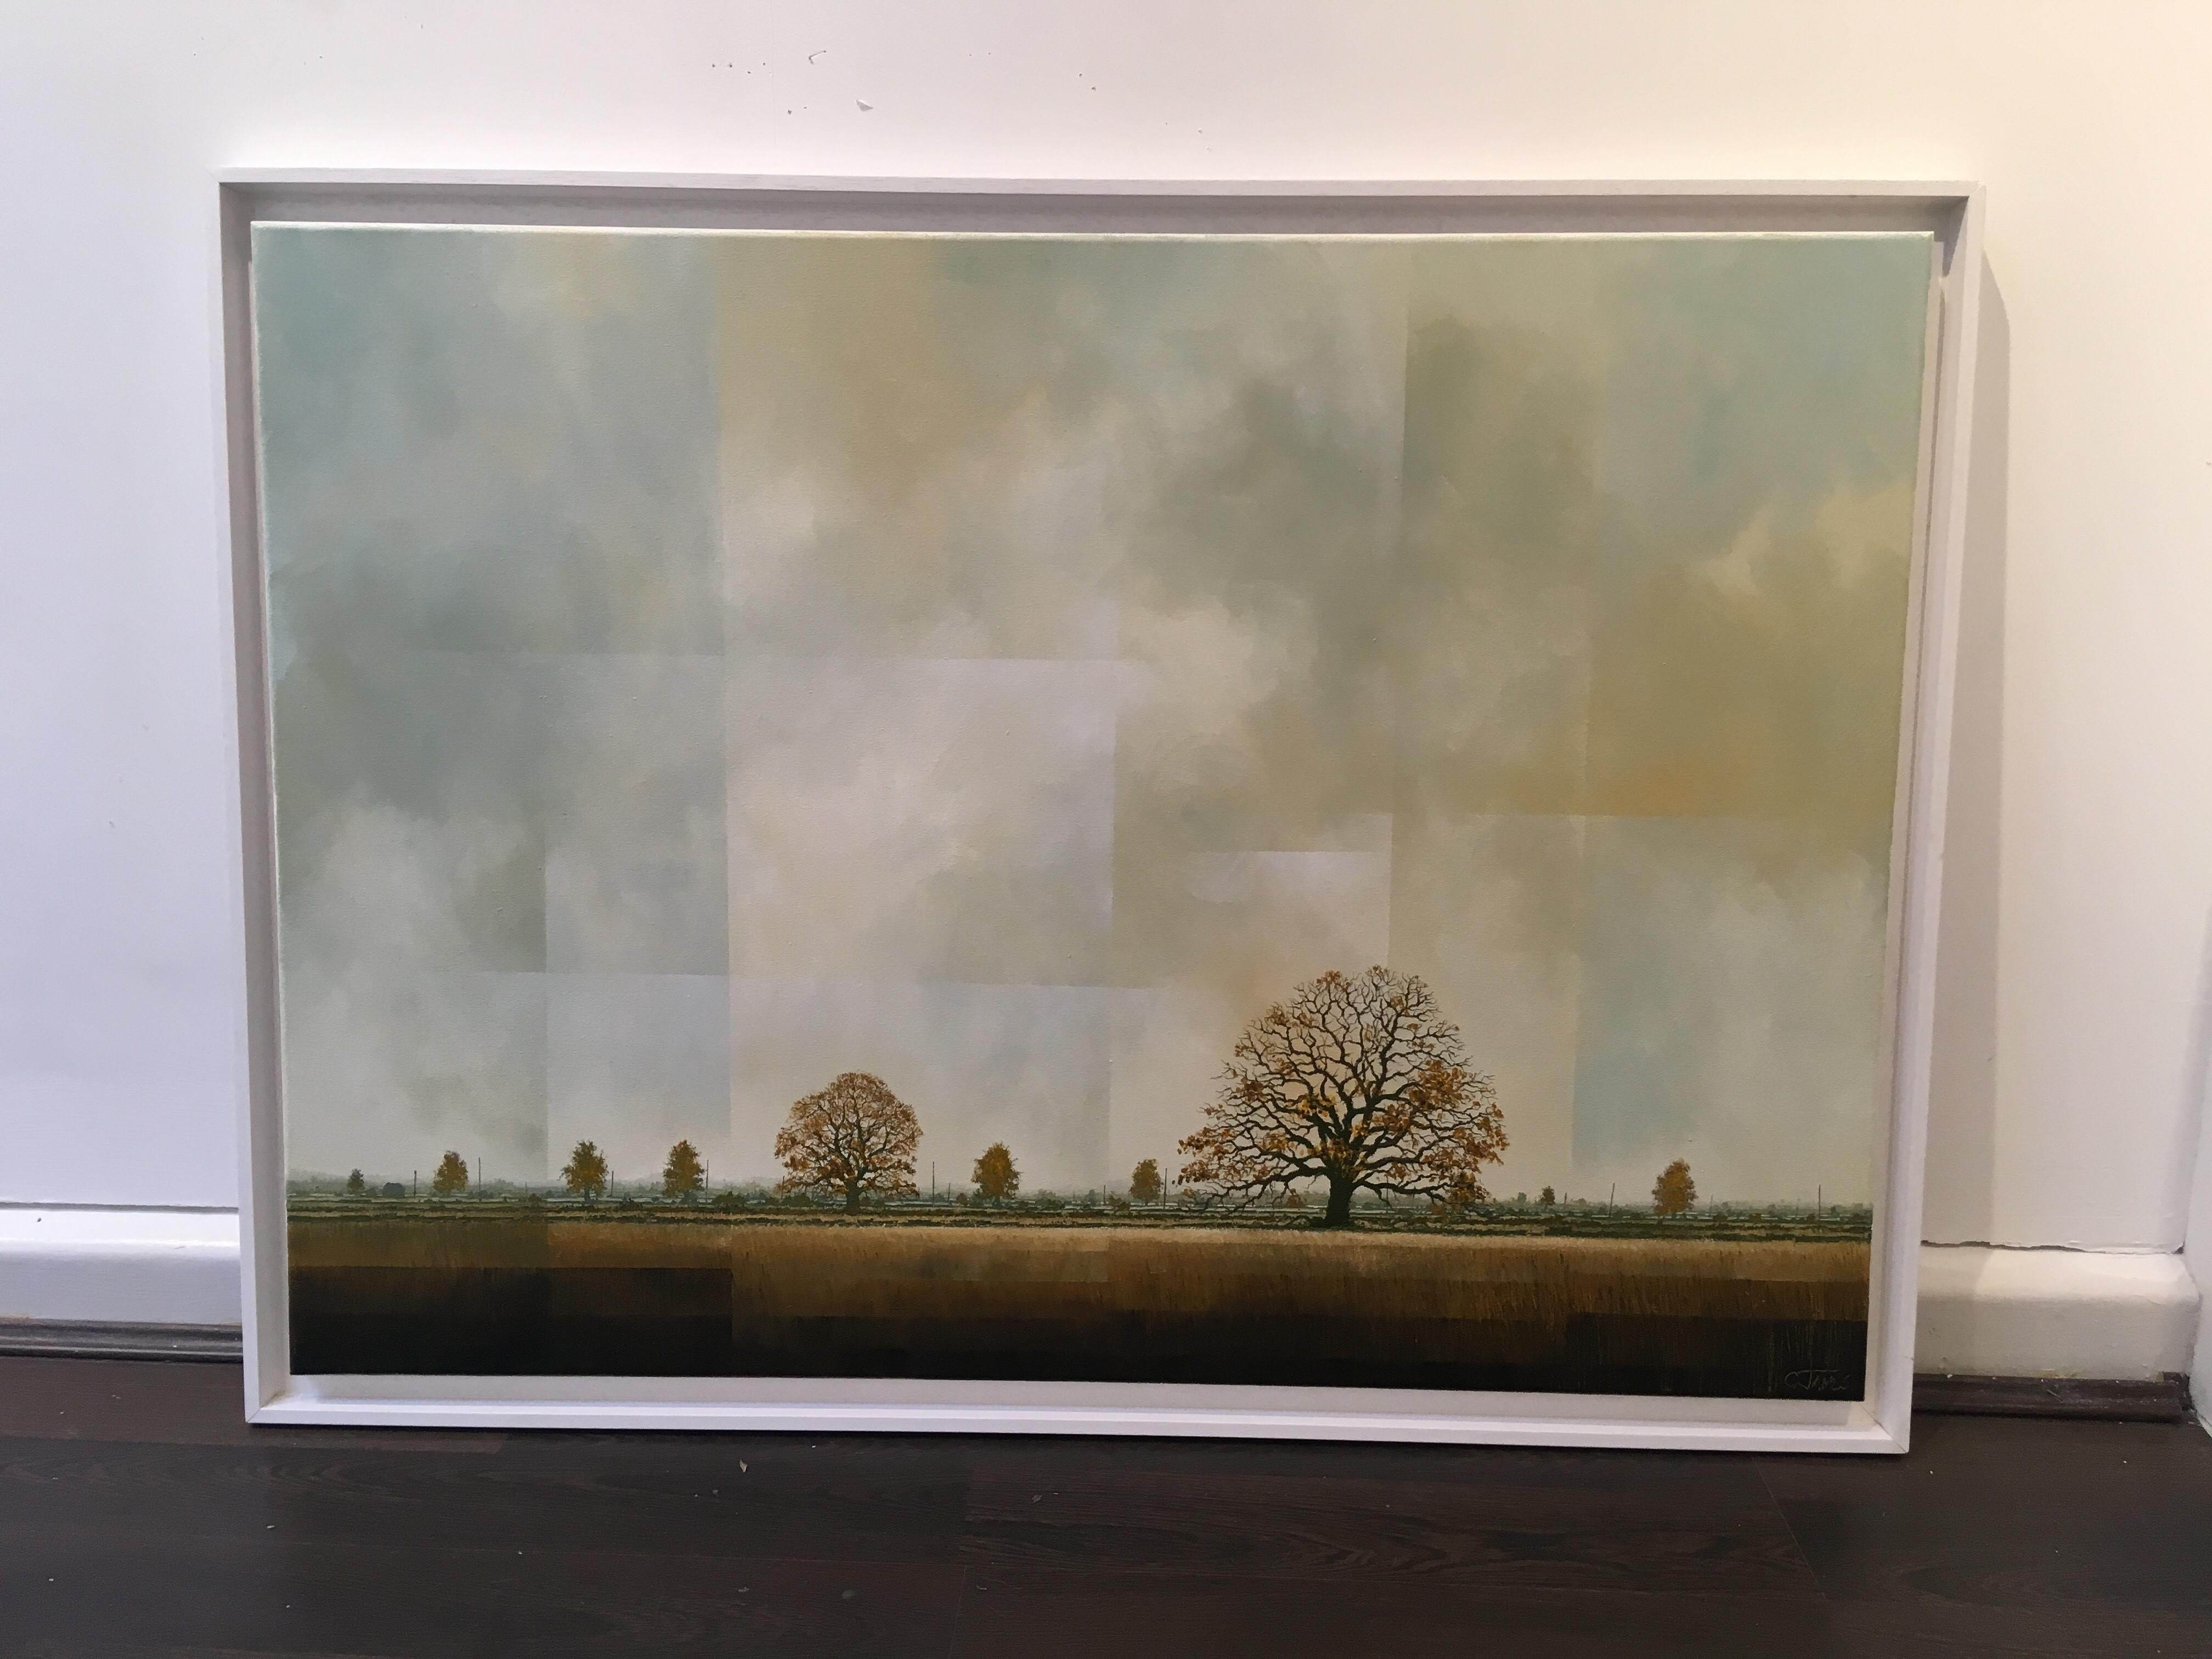 The temporal approach is the essence of Glynne’s work and results in highly stylised canvases, each painting approaches the landscape in terms of its changes, not as individual paintings but upon the same canvas, strips of fenland character